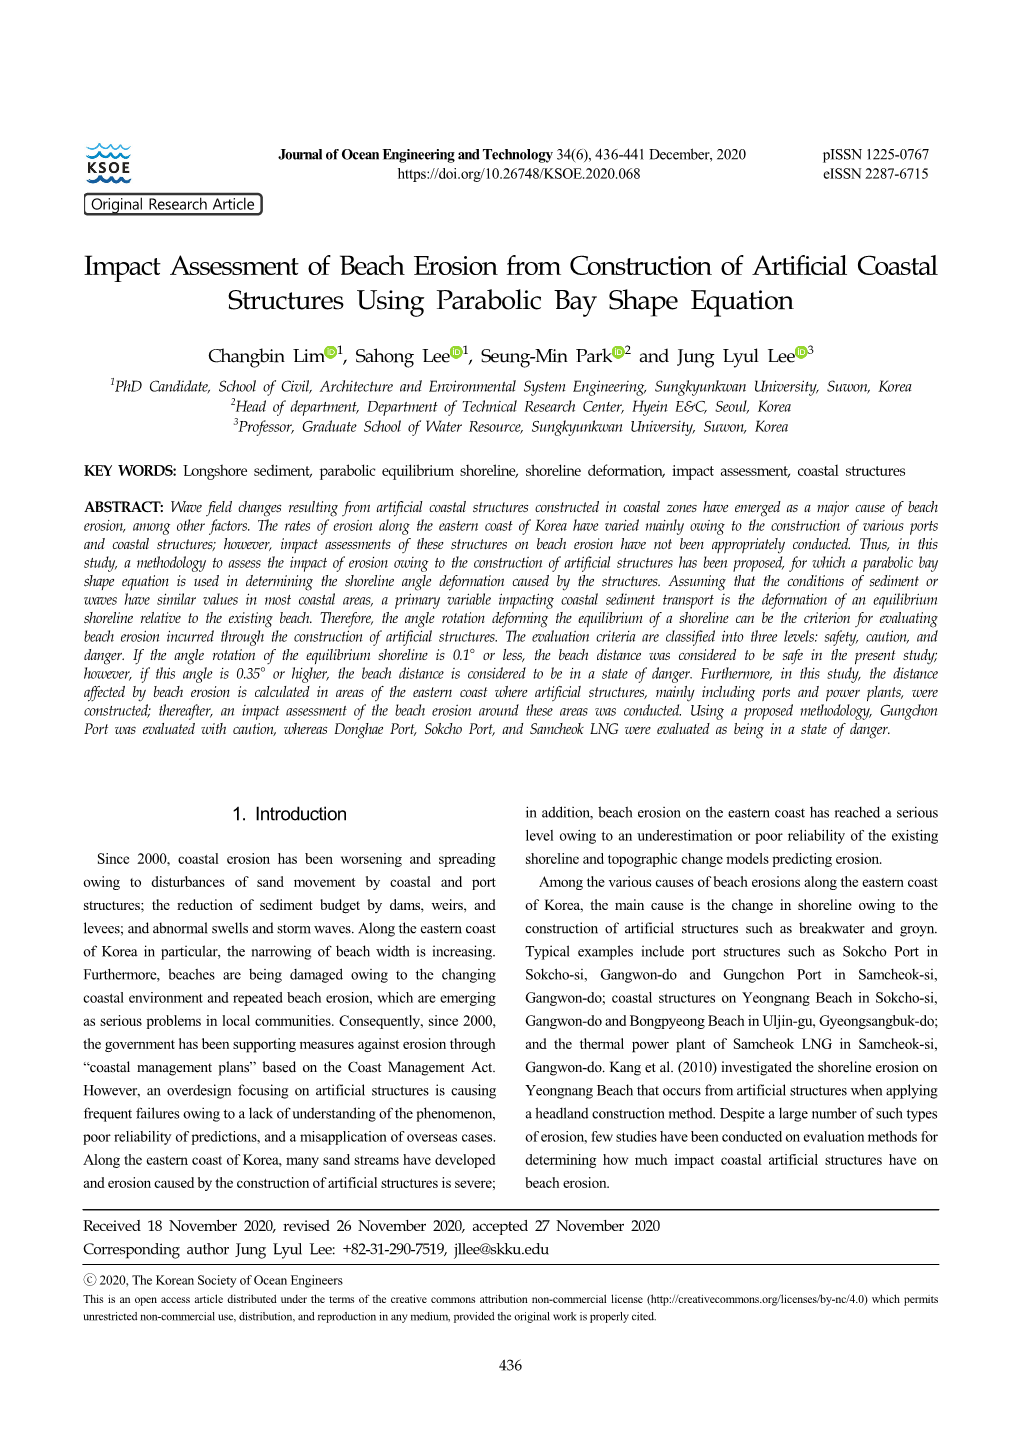 Impact Assessment of Beach Erosion from Construction of Artificial Coastal Structures Using Parabolic Bay Shape Equation